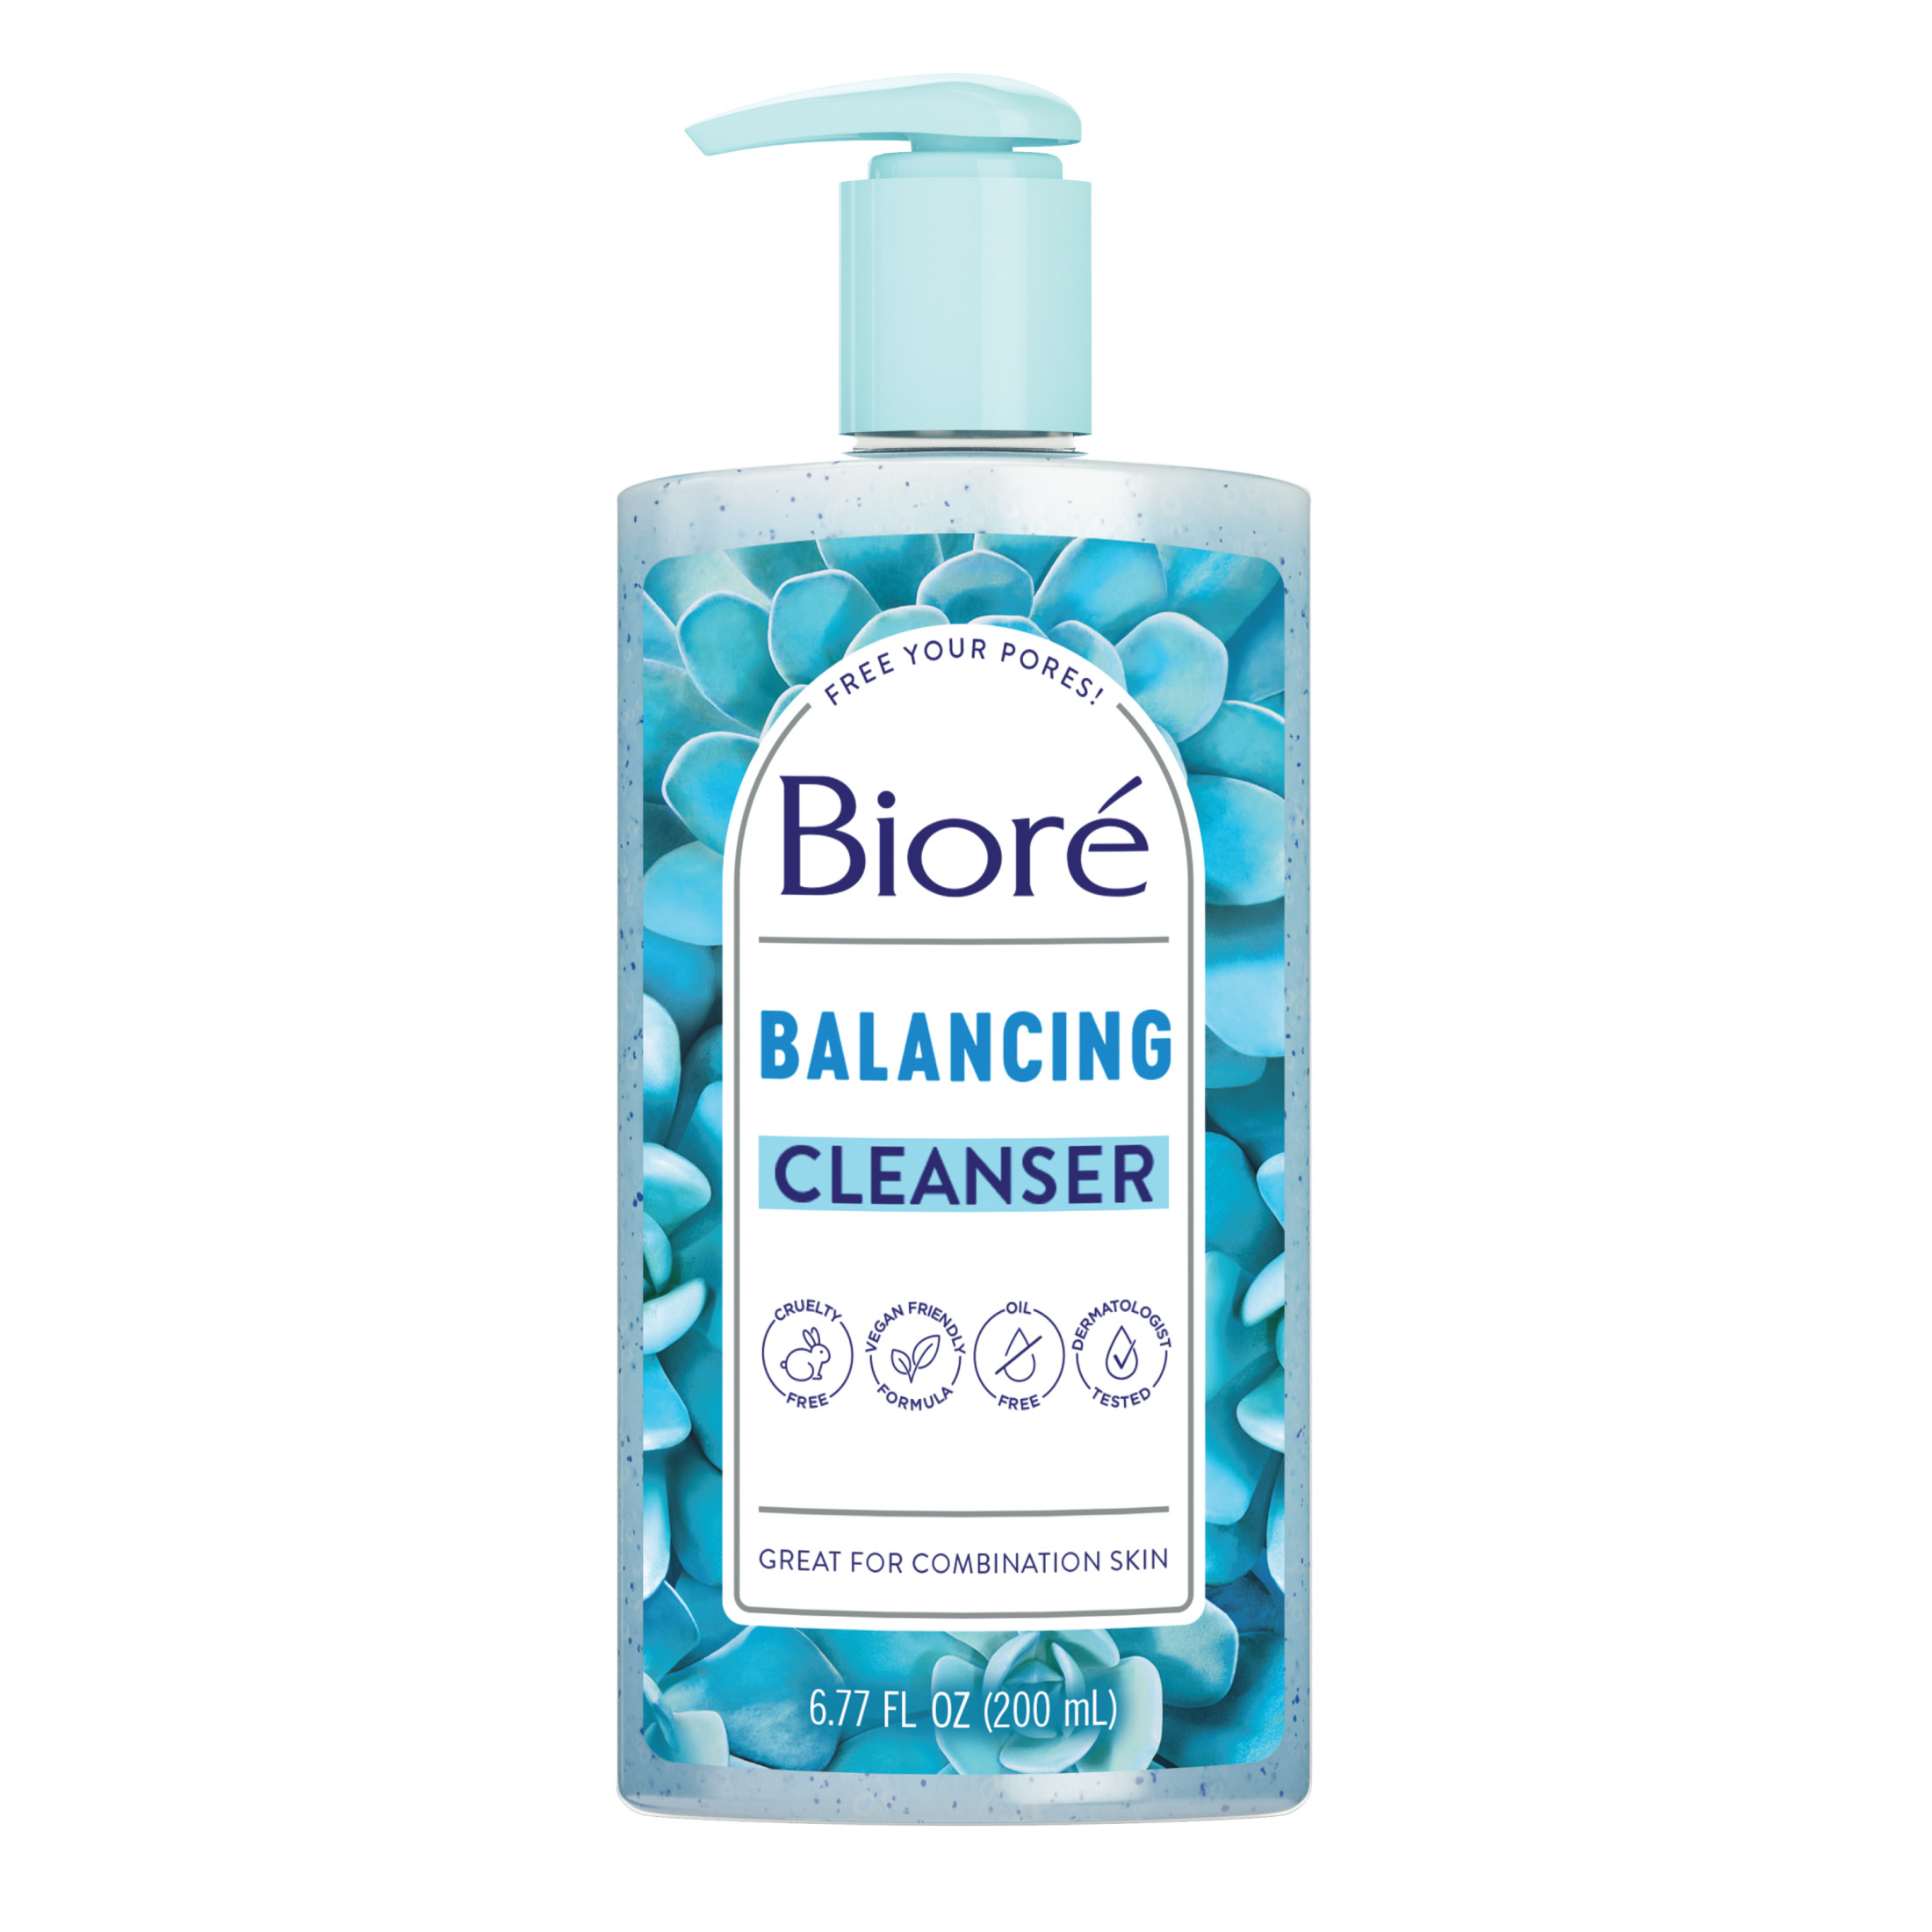 Biore Balancing Face Wash, PH Balanced Face Cleanser, Combination Skin, Cruelty Free 6.77 Oz - image 1 of 11